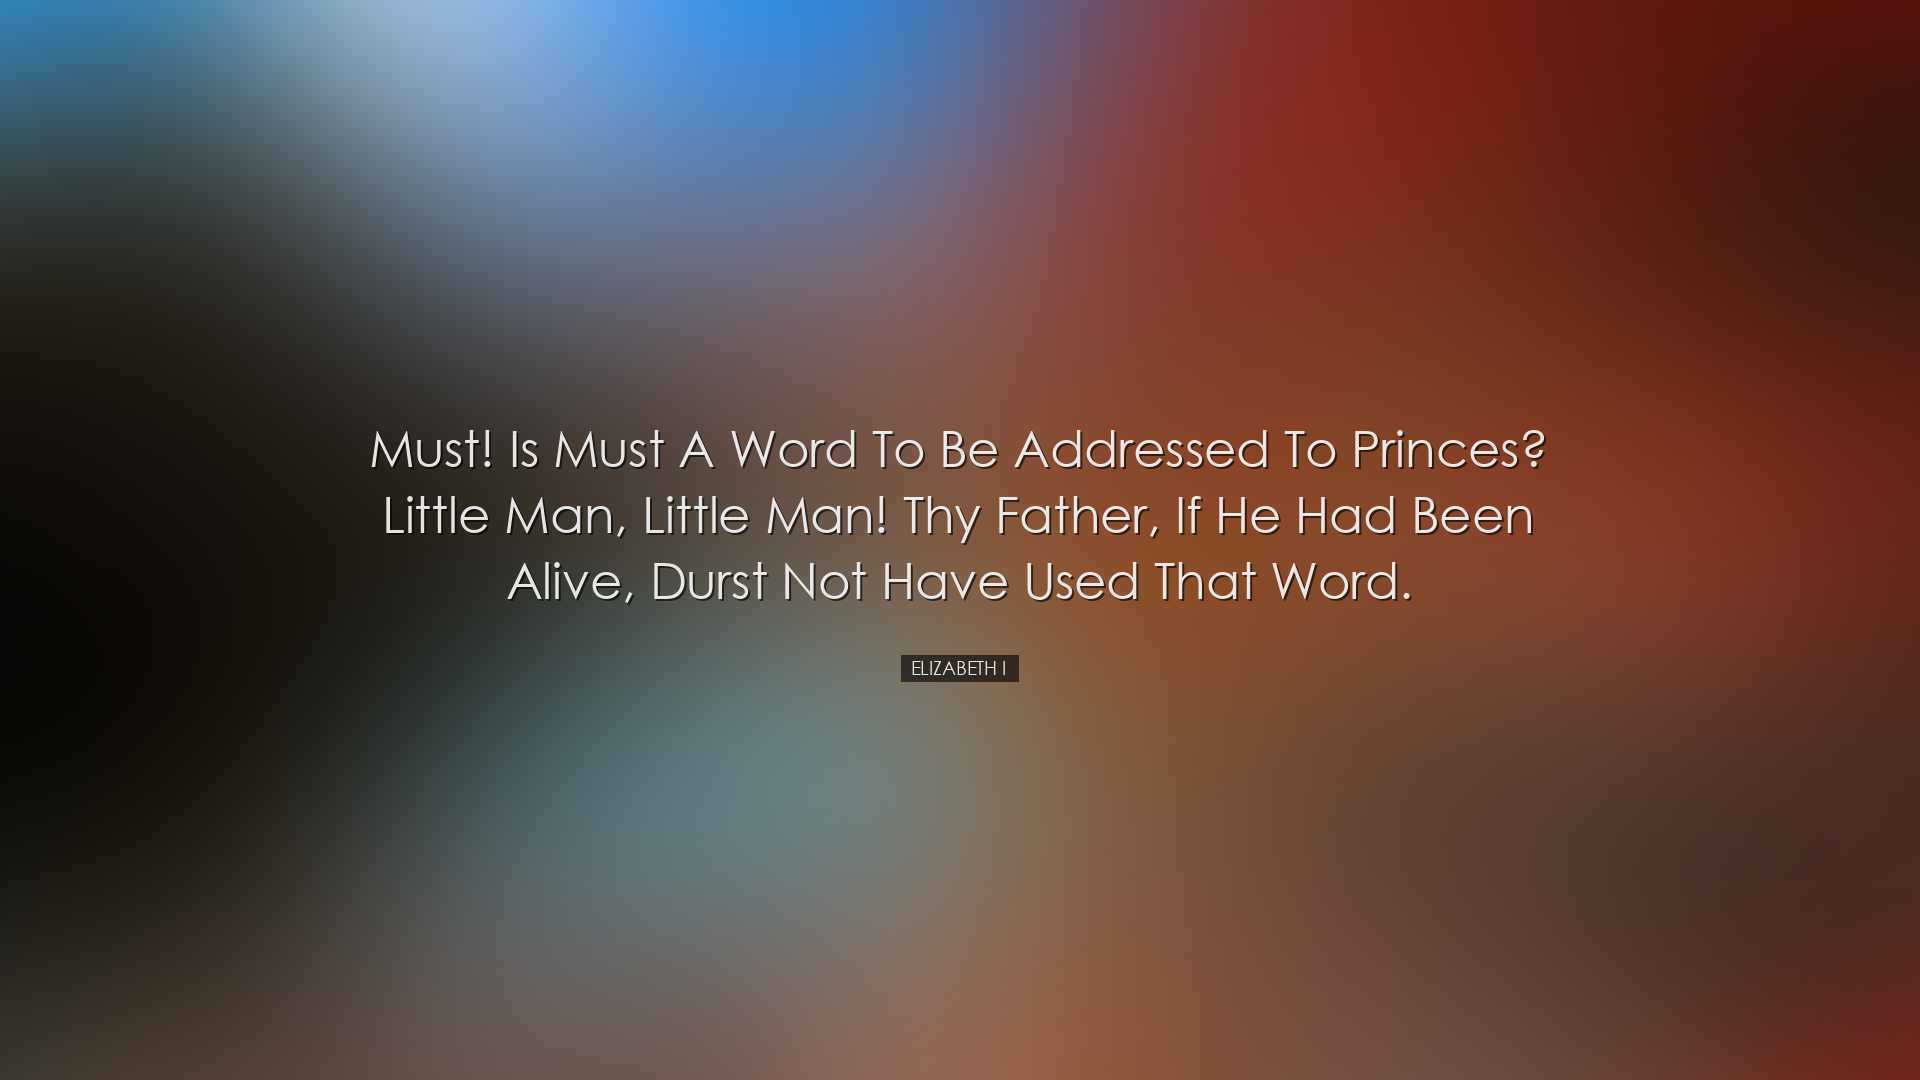 Must! Is must a word to be addressed to princes? Little man, littl